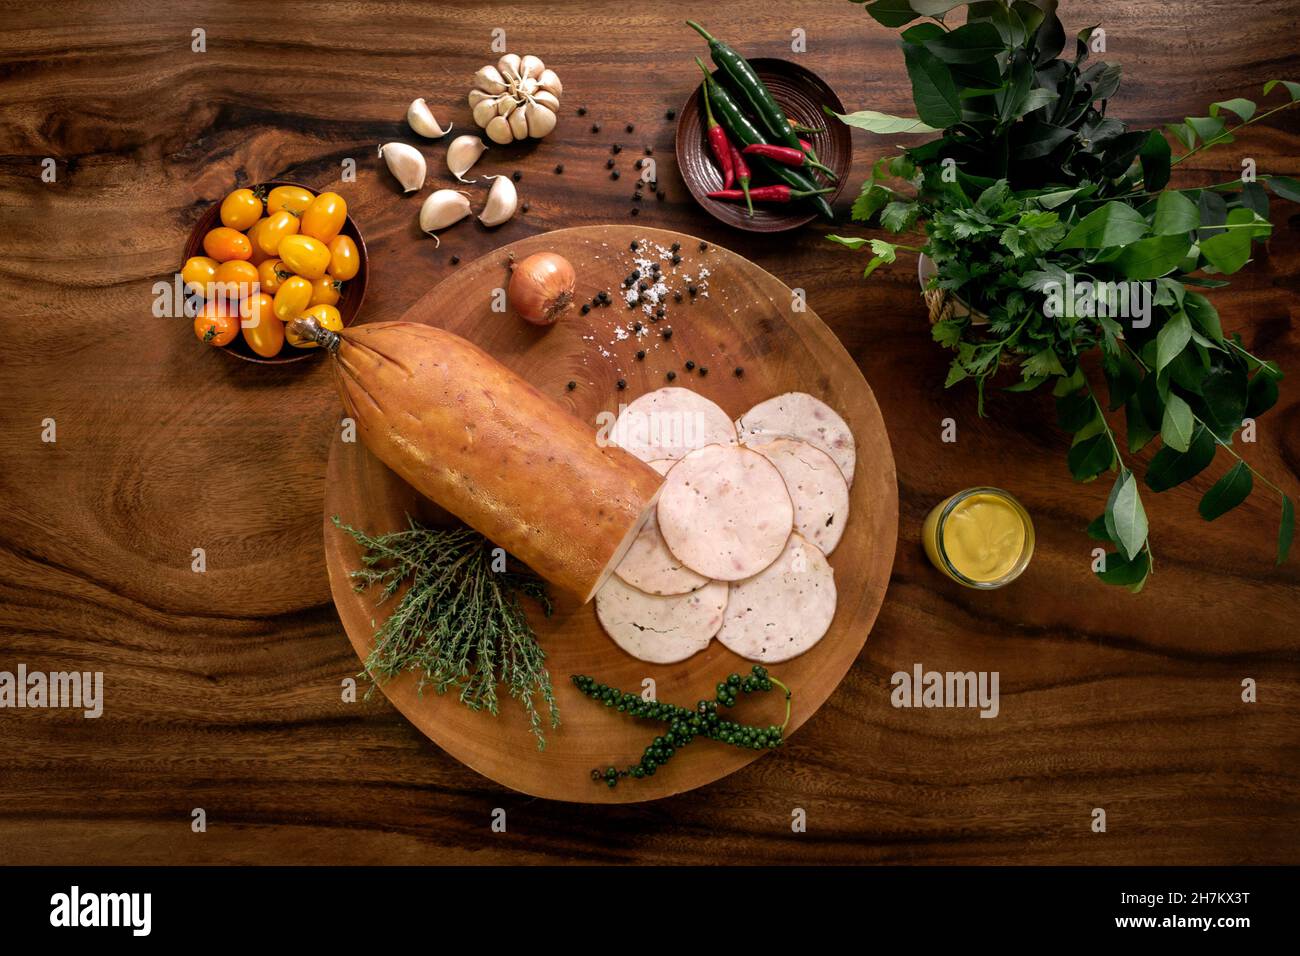 smoked chicken ham on rustic wood table with natural ingredients arrangement Stock Photo